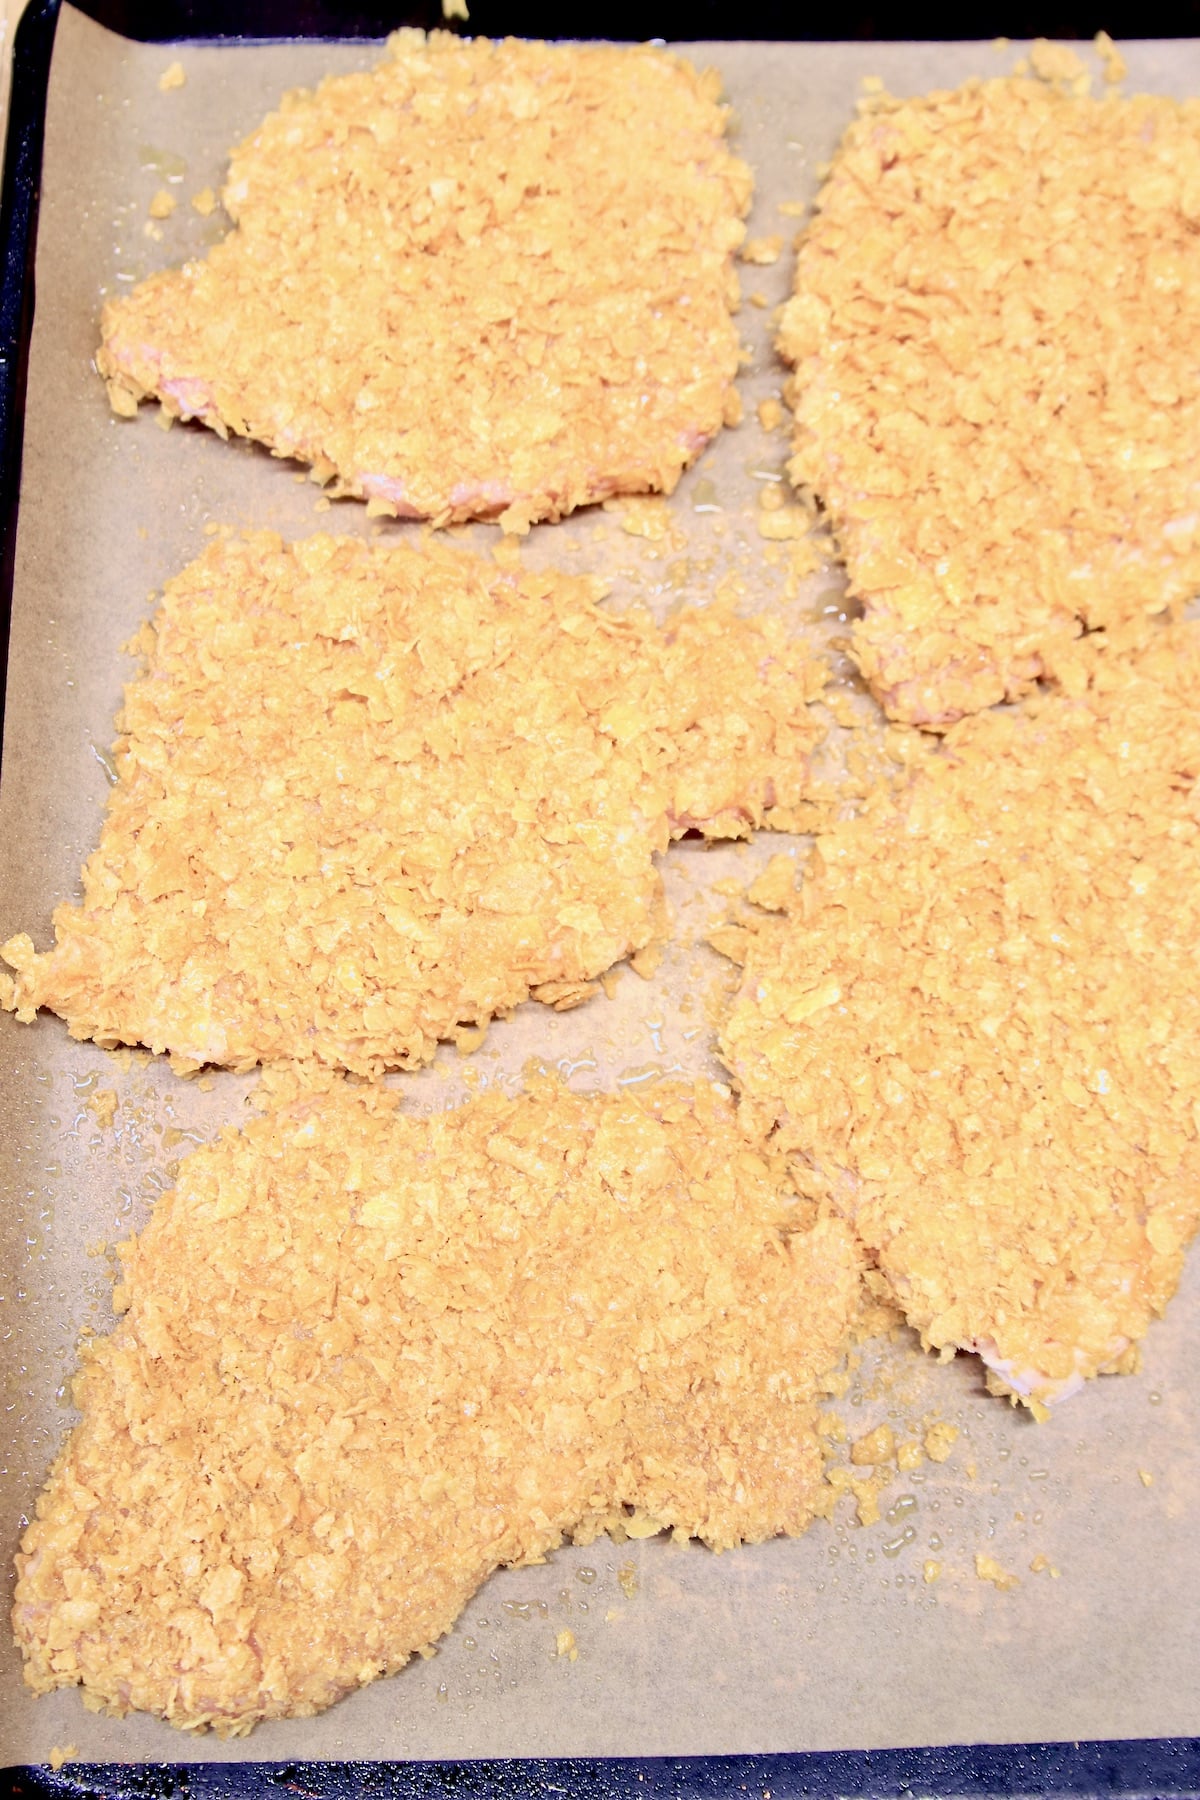 Pork chops breaded with cornflakes on a baking sheet.